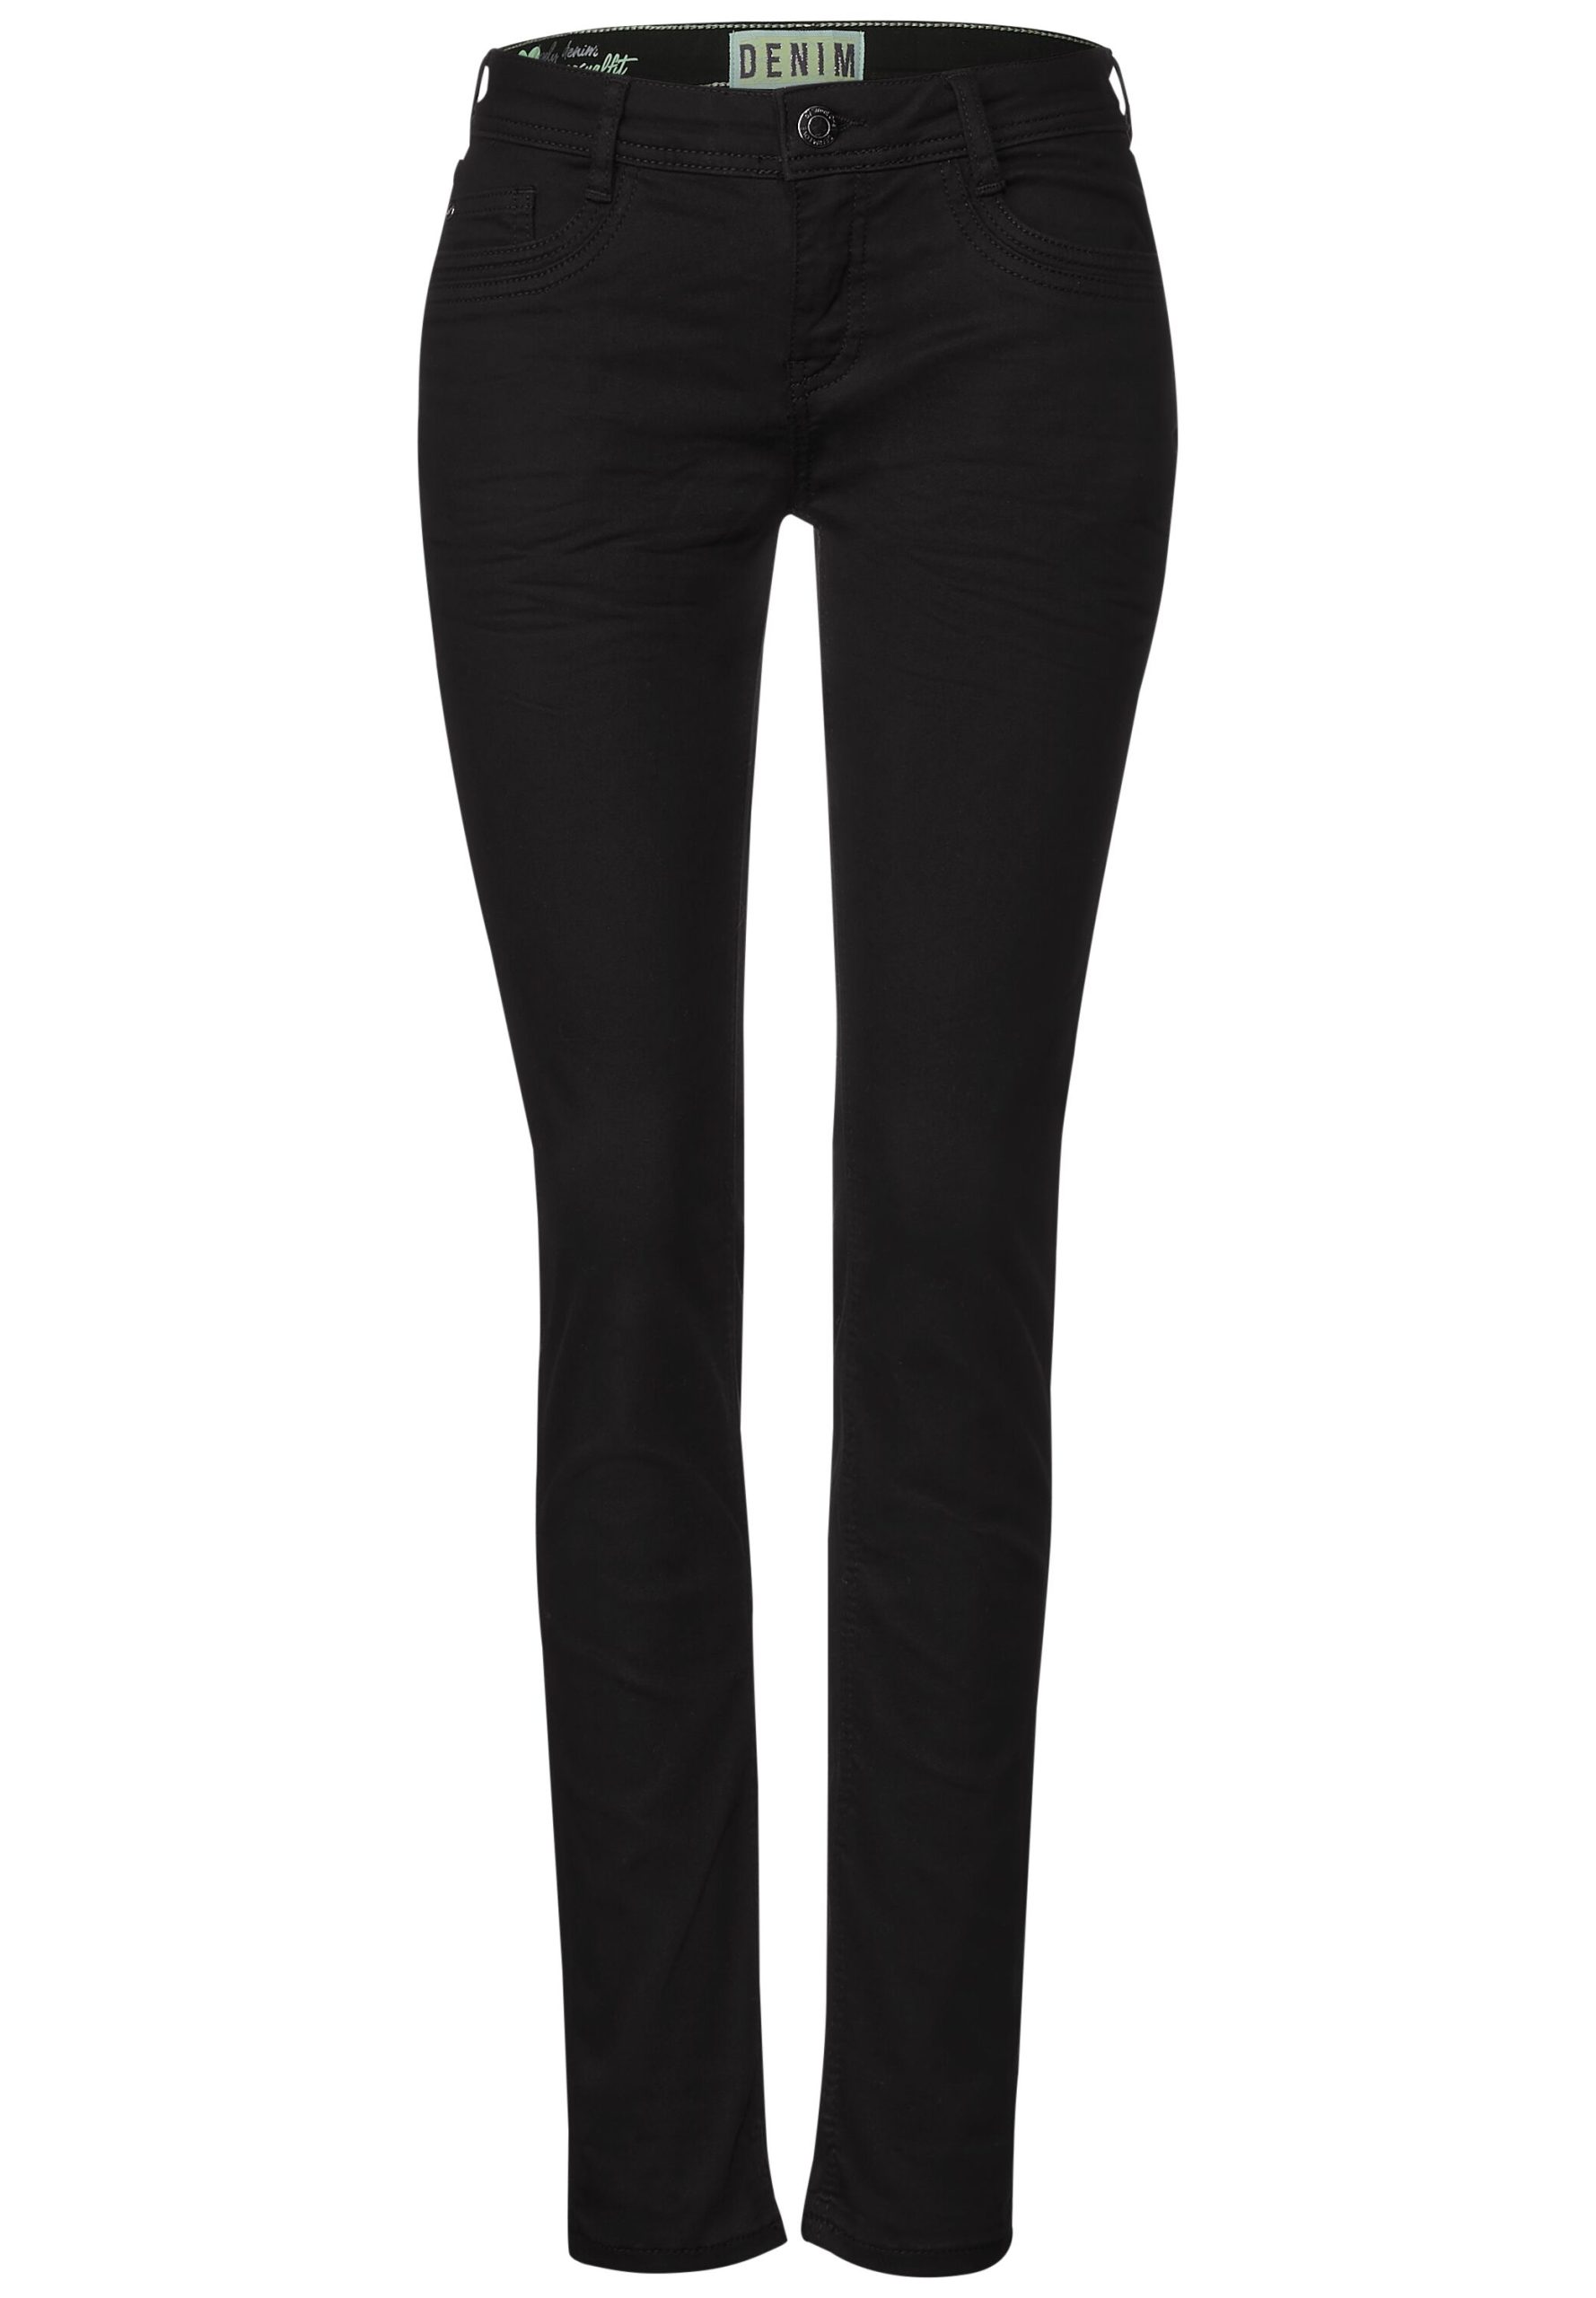 STREET Gutbrod ONE - Modehaus Thermo Fit Jeans - Casual